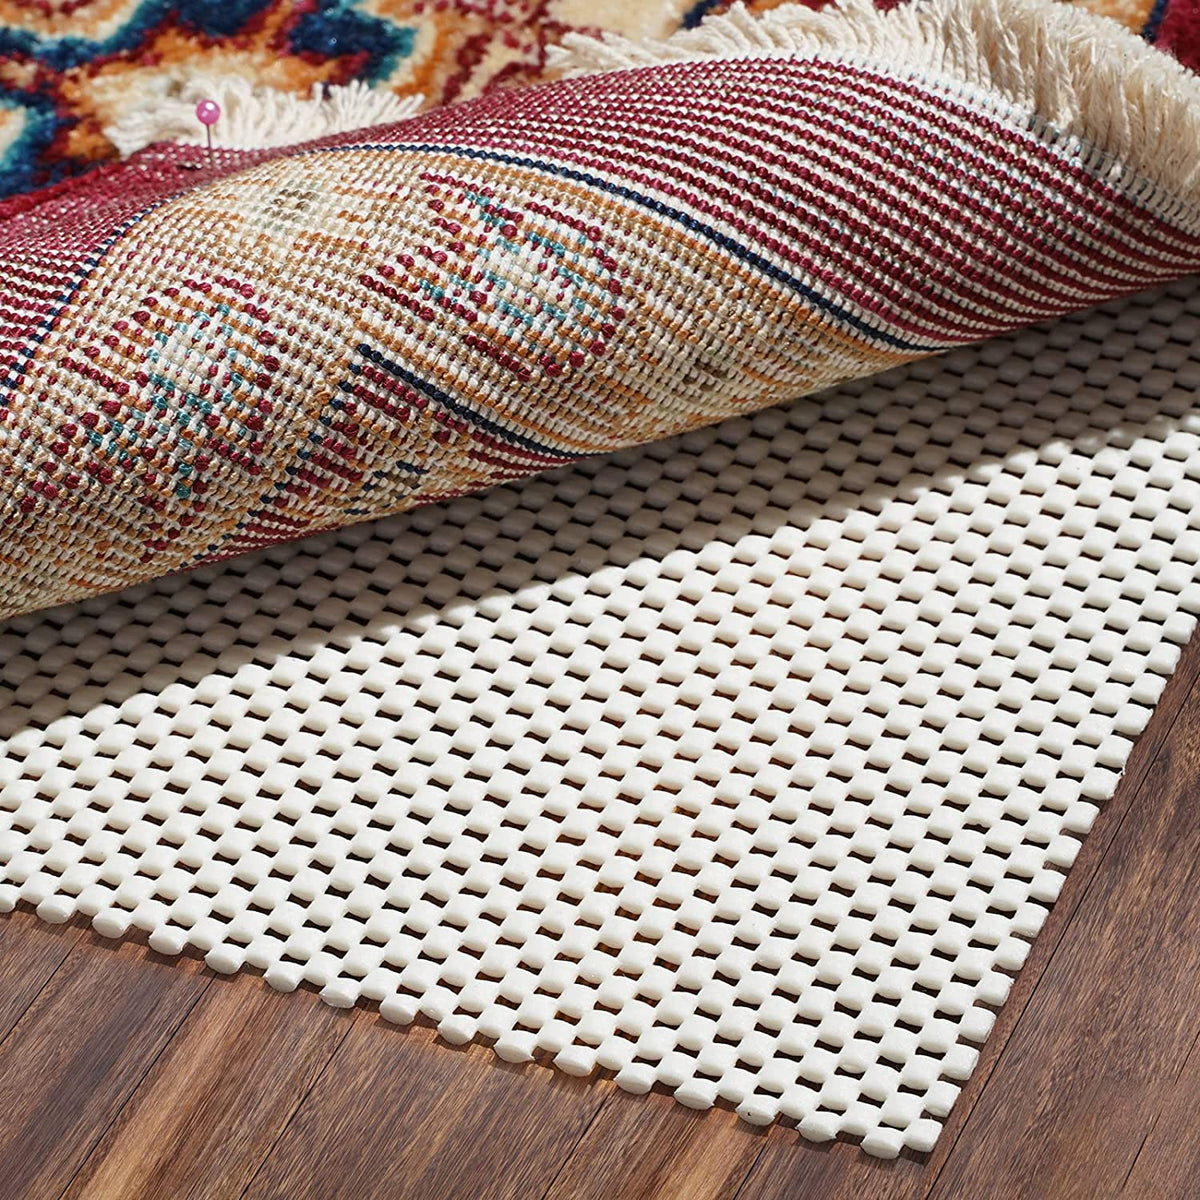 Non Slip Area Rug Pad Gripping Carpet Pad for Area Rugs and Hardwood Floors